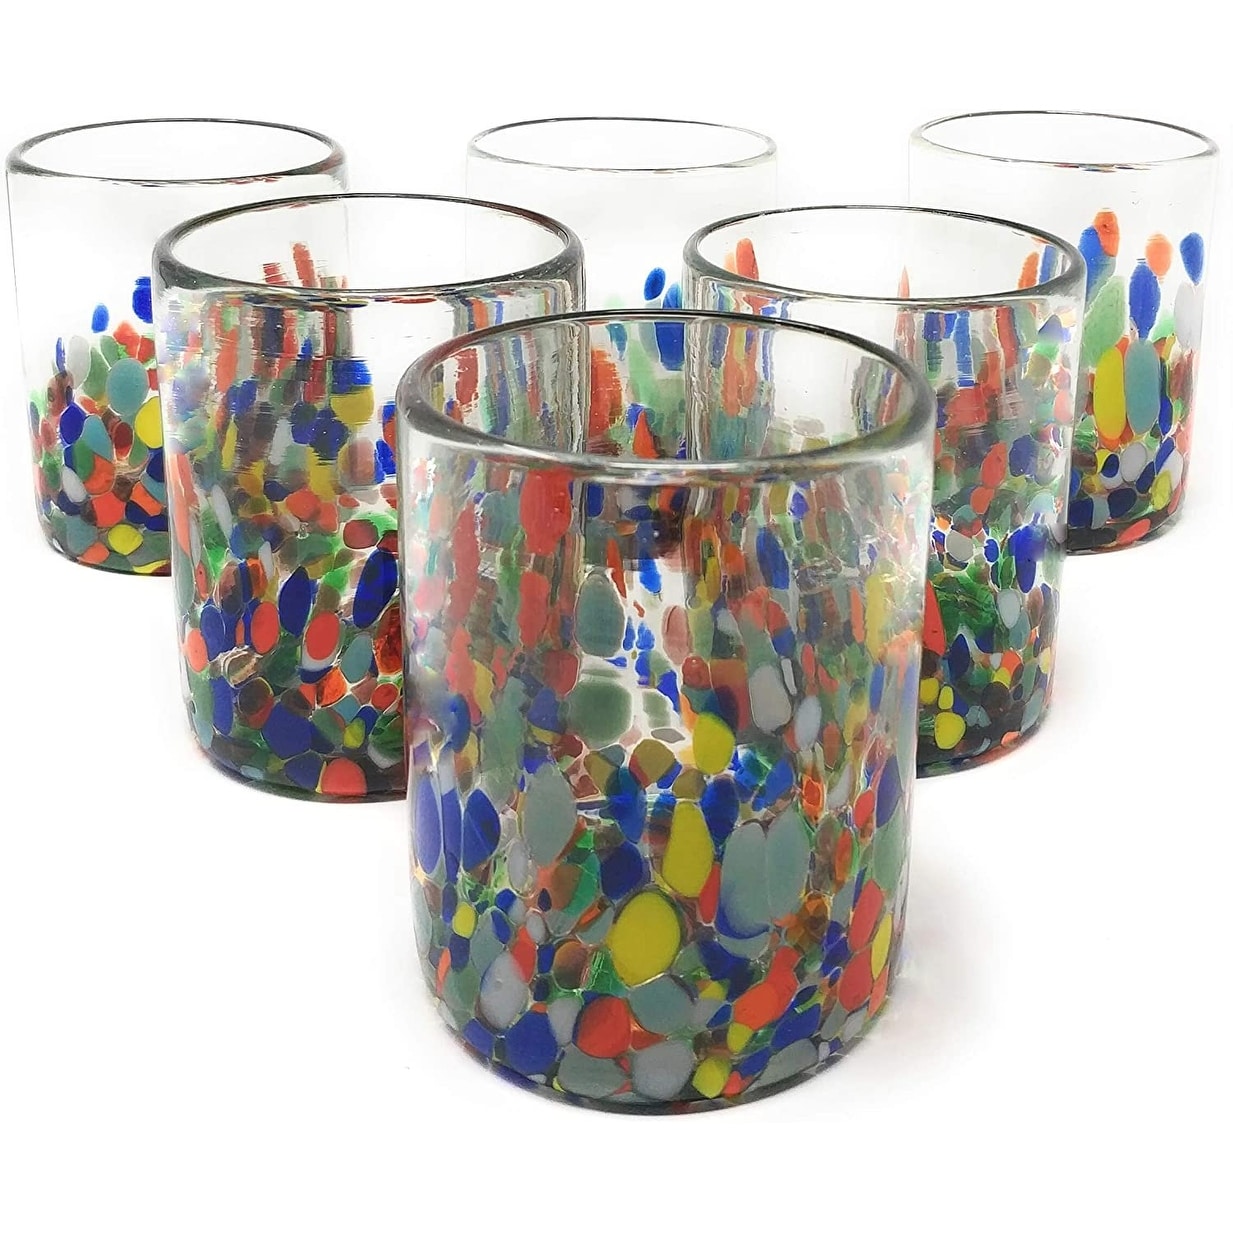 https://ak1.ostkcdn.com/images/products/is/images/direct/a89e4caee8d4142936684c9ad79171e82e1e6bd7/Dos-Suenos-Hand-Blown-Mexican-Drinking-Glasses---Set-of-6-Confetti-Carmen-Tumbler-Glasses-%2810-oz-each%29.jpg